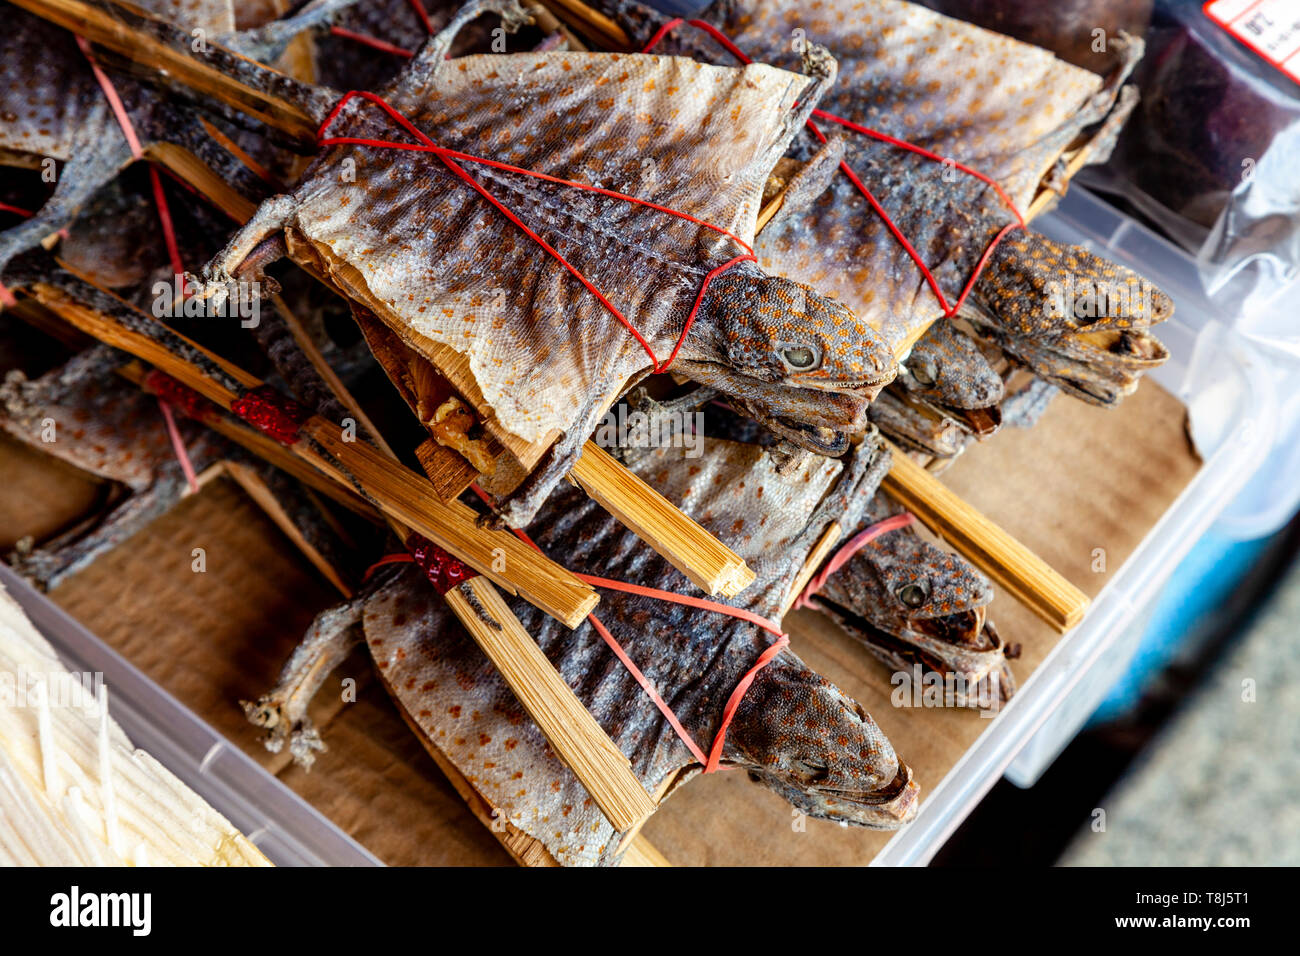 Dried Tokay Gecko For Sale In Chinese Medecine Shop, Chinatown, Singapore, South East Asia Stock Photo